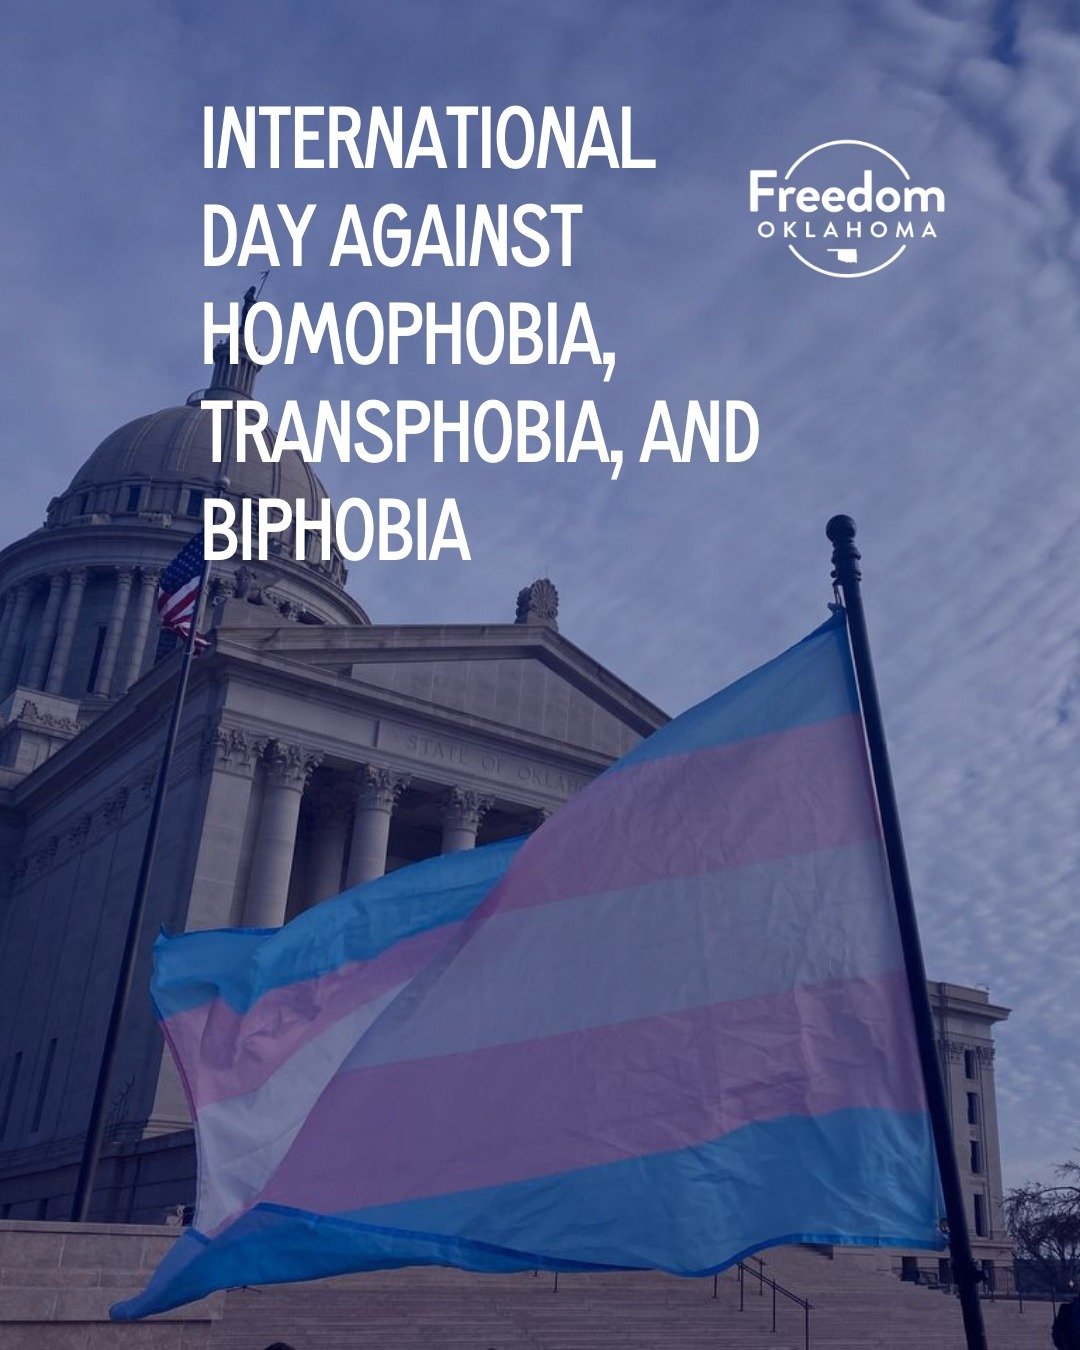 Today is International Day Against Homophobia, Transphobia, and Biphobia (#IDAHOTB), a day rooted in fighting the fear and hate-based harm 2SLGBTQ+ people are subjected to because of our gender identity, gender expression, sexuality, or a combination